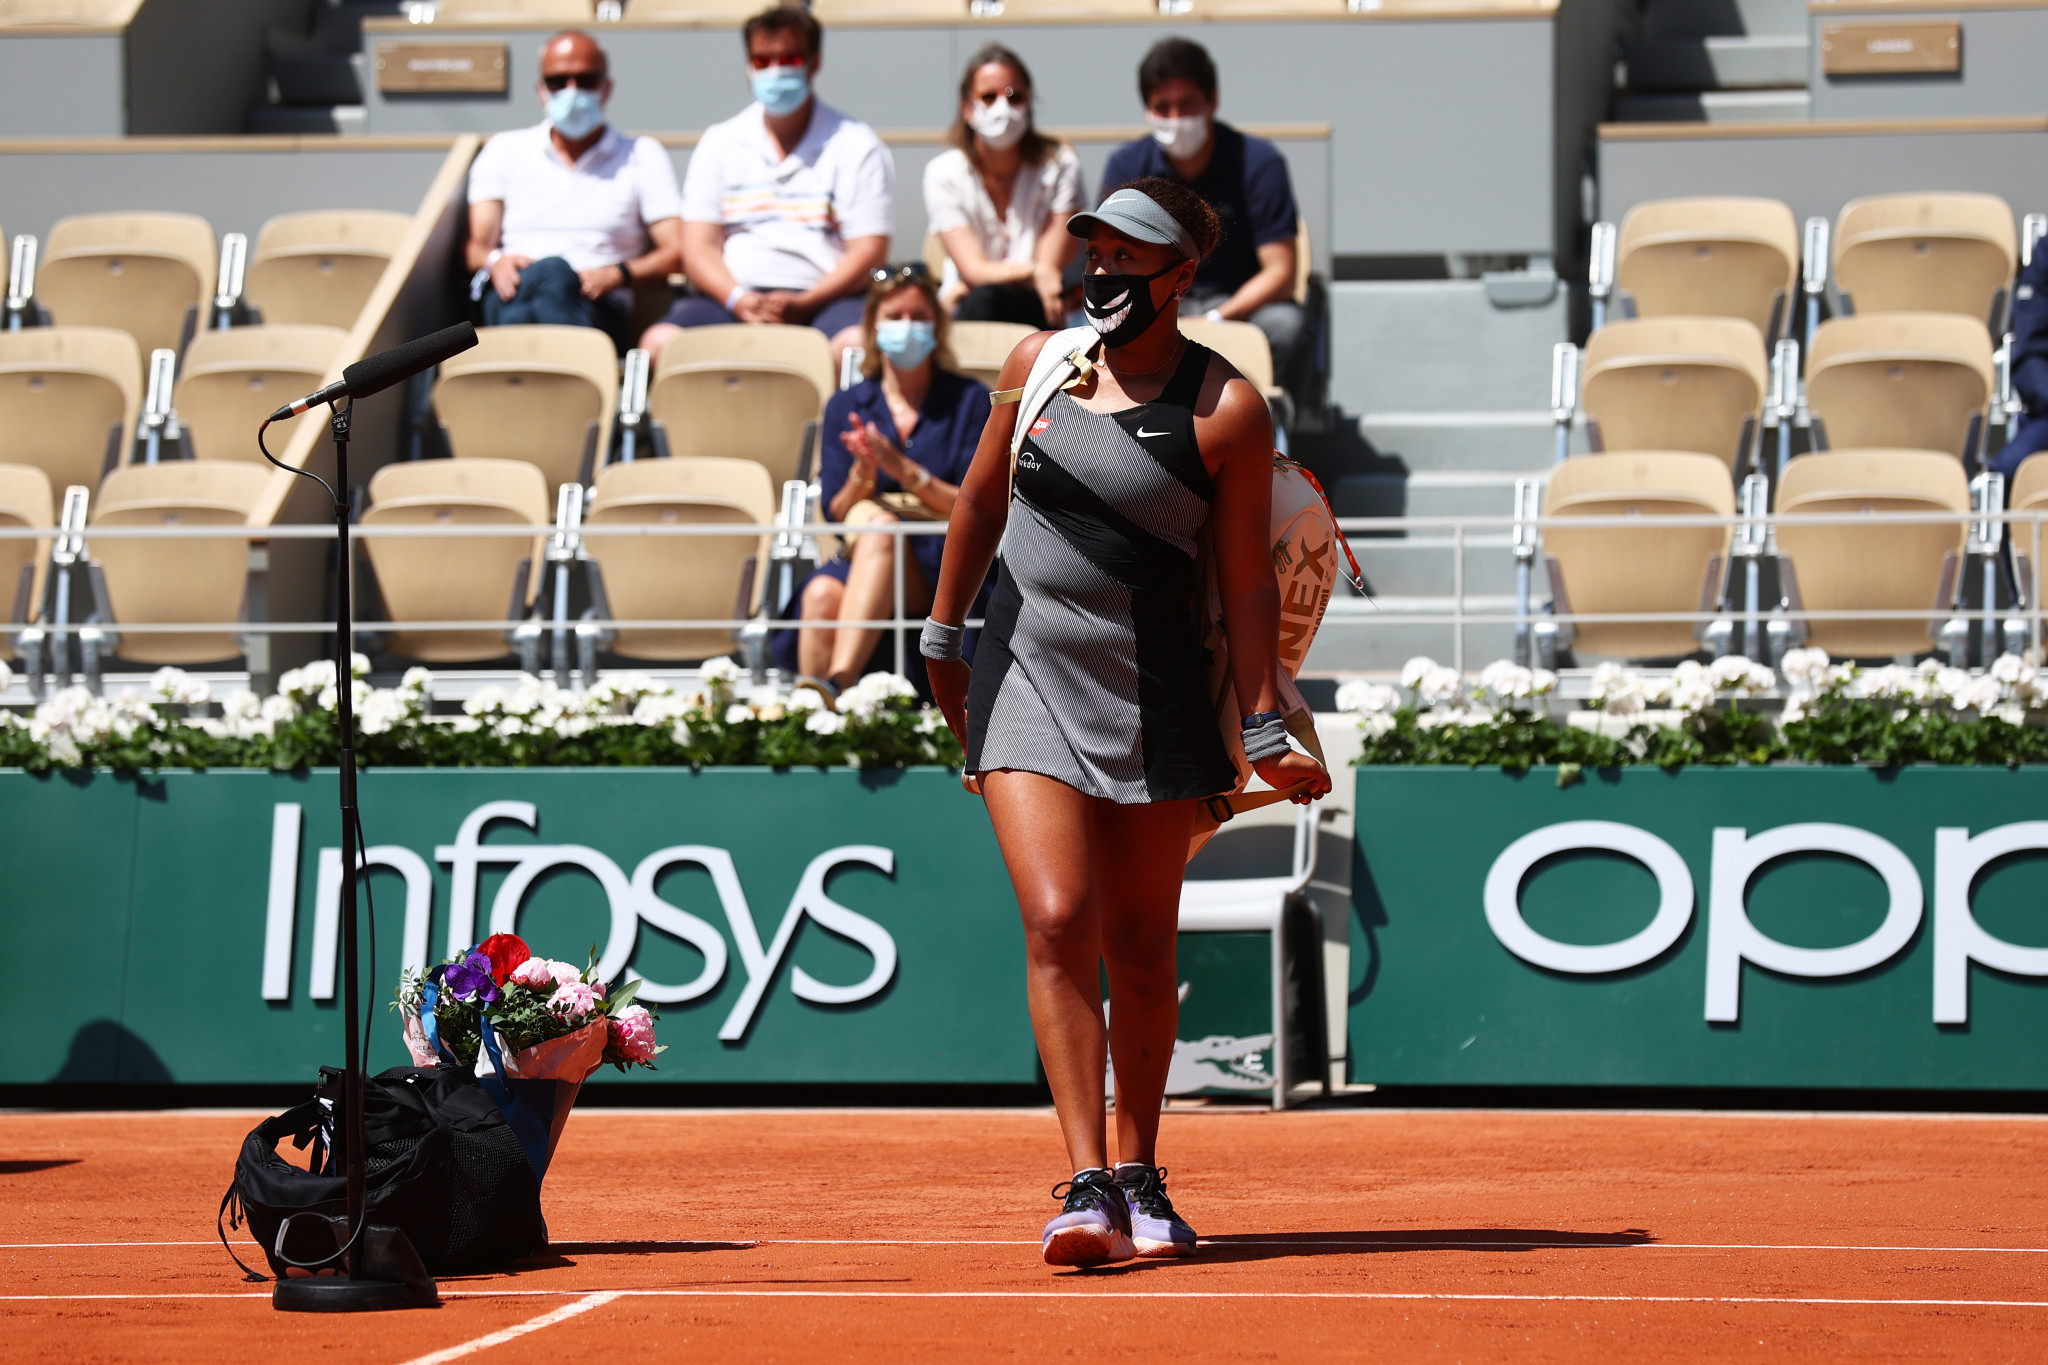 Osaka initially said she would not partake in press conferences at the French Open, before withdrawing from the competition after the first round ©Getty Images